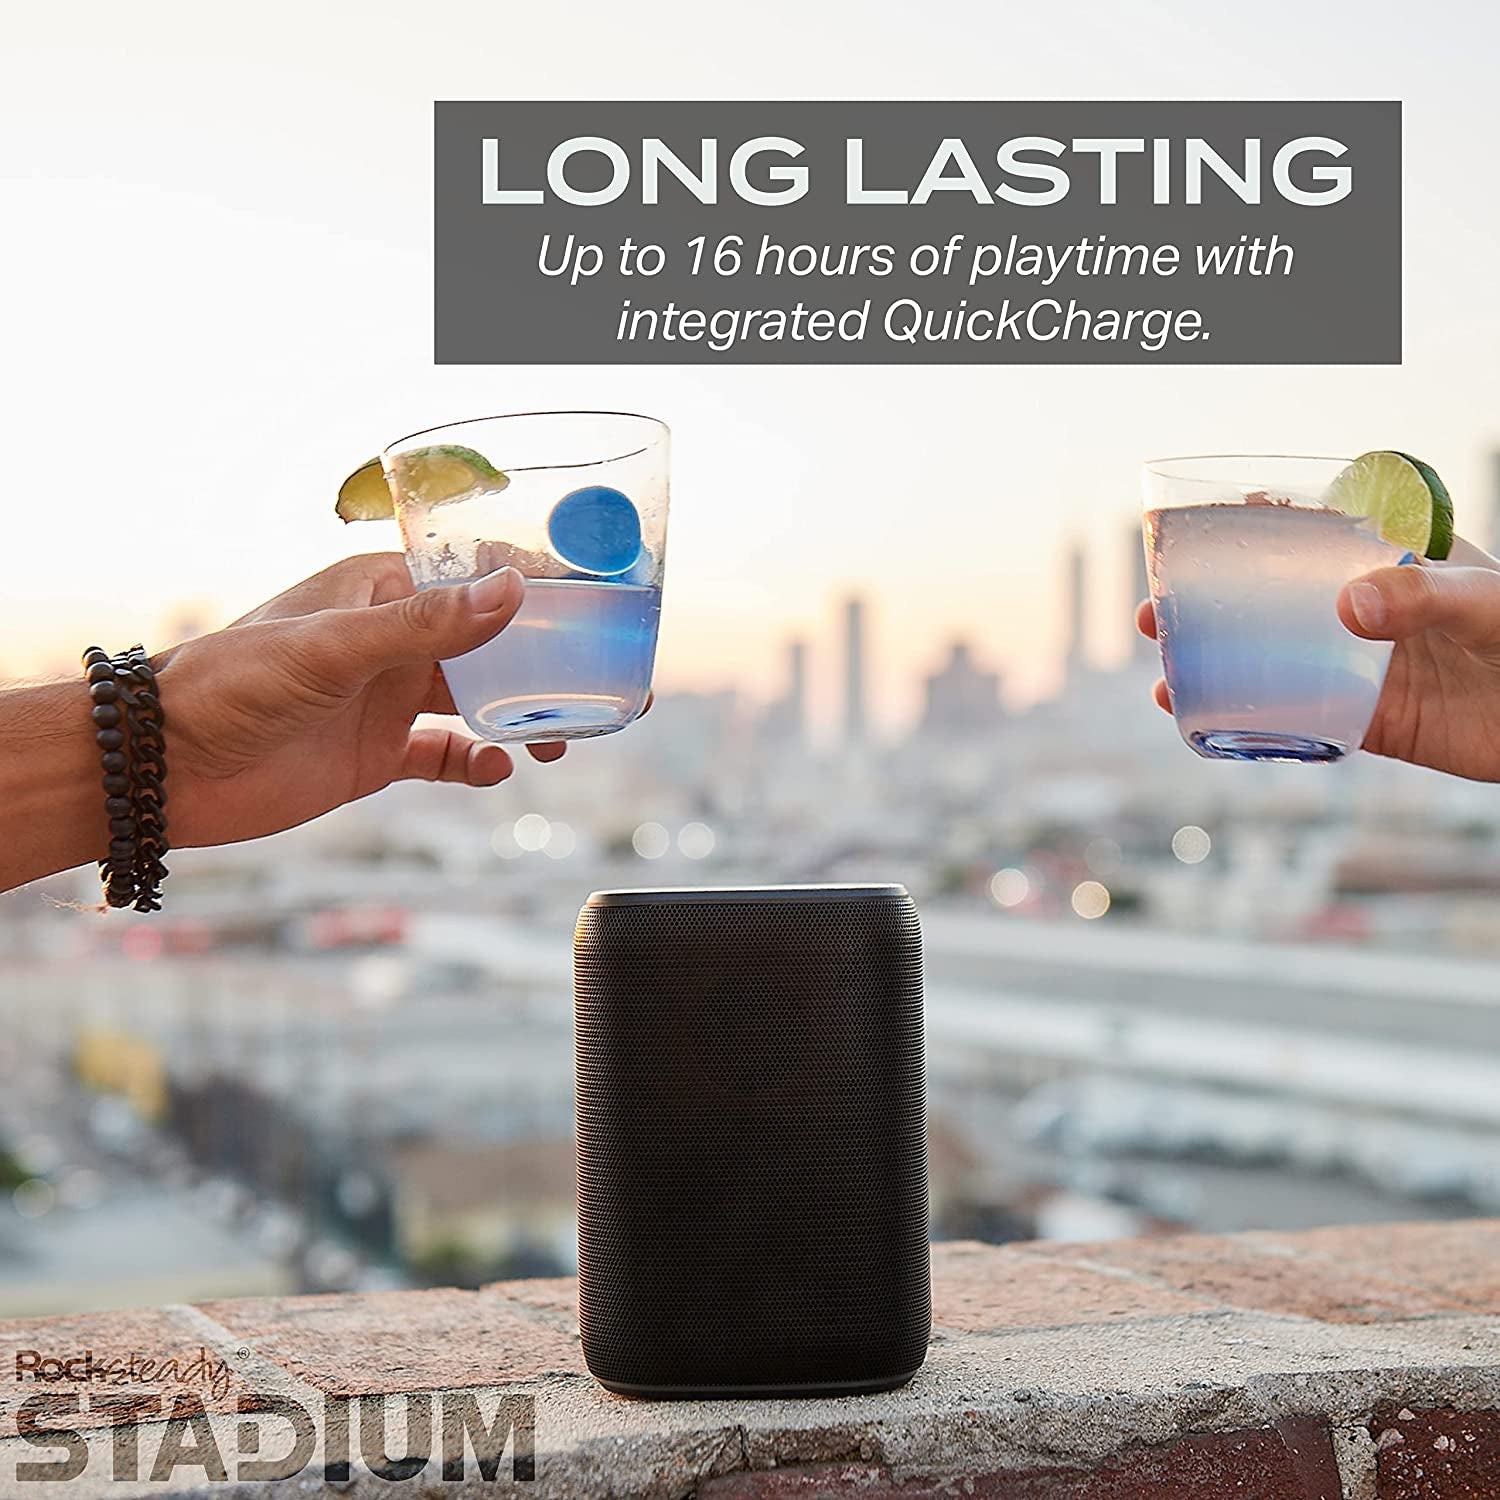 Rocksteady Stadium Portable Bluetooth Speaker Wirelessly Connectible (1 Speaker) - for Indoors & Outdoors - up 30 Hour Battery Life